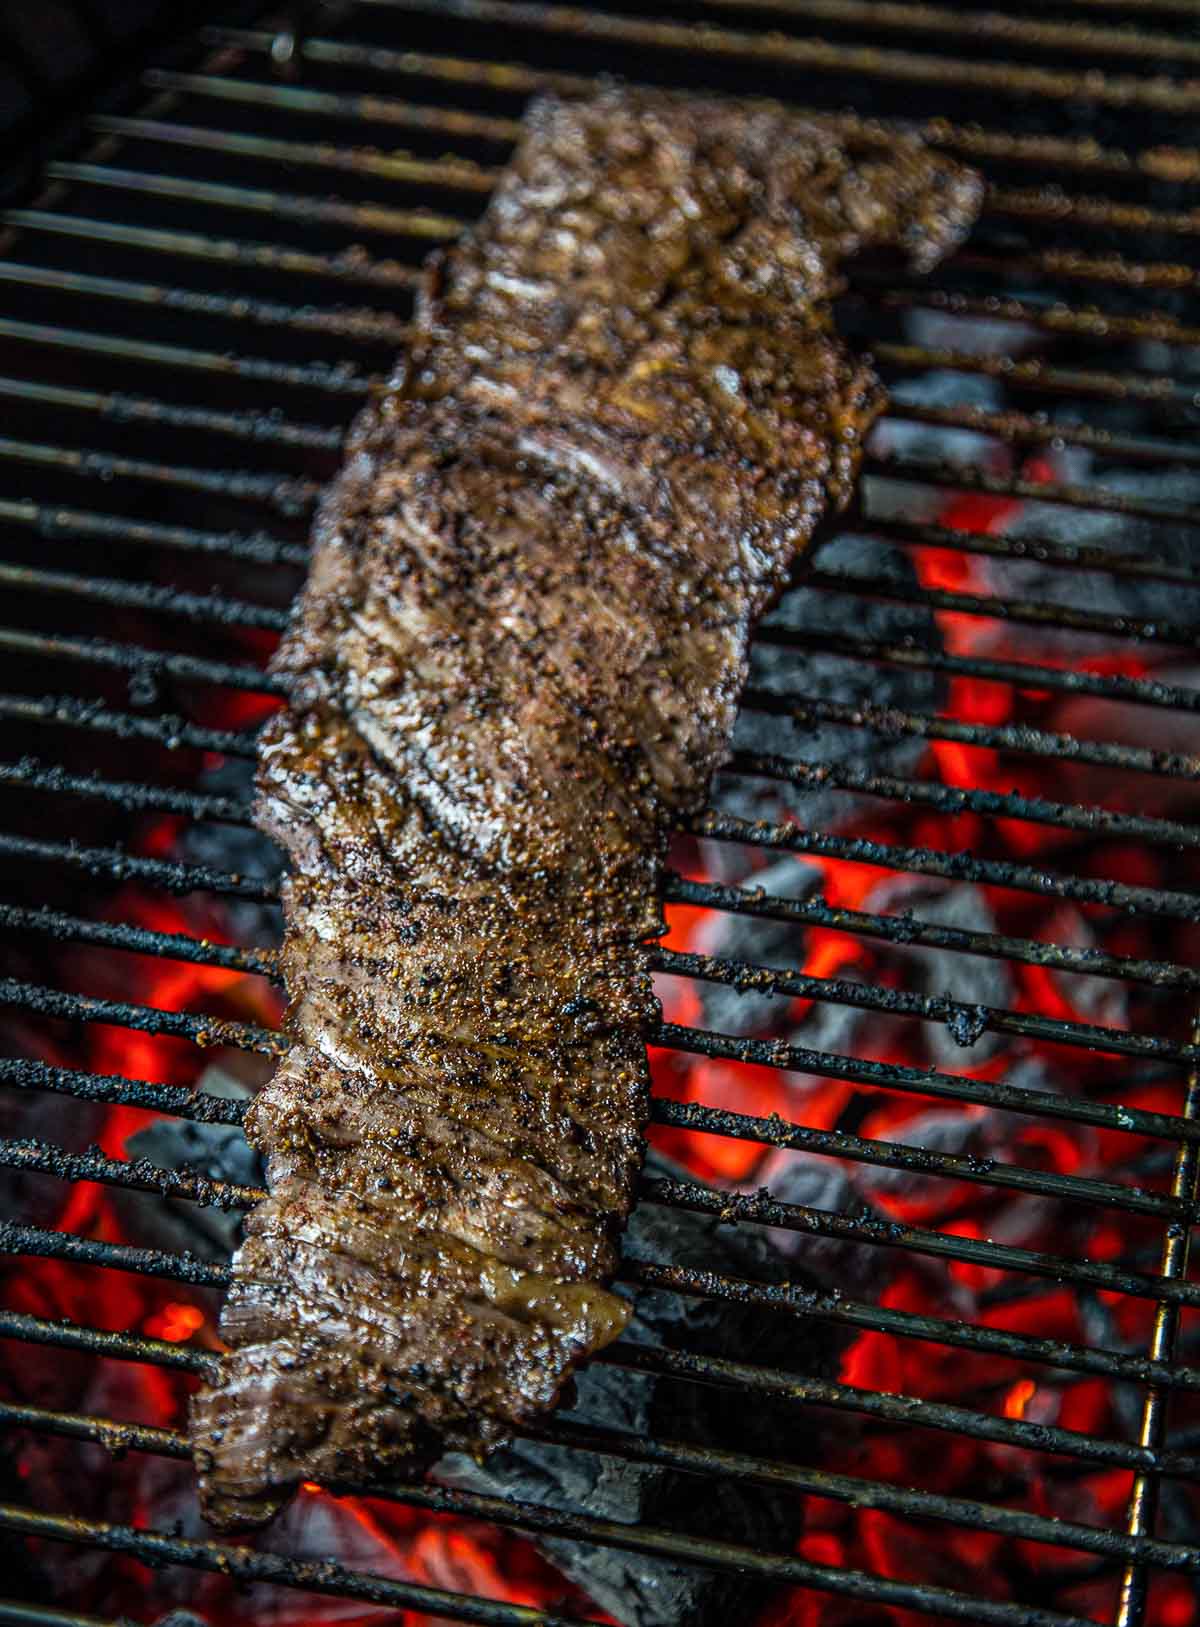 Skirt steak being grilled direct over charcoal.